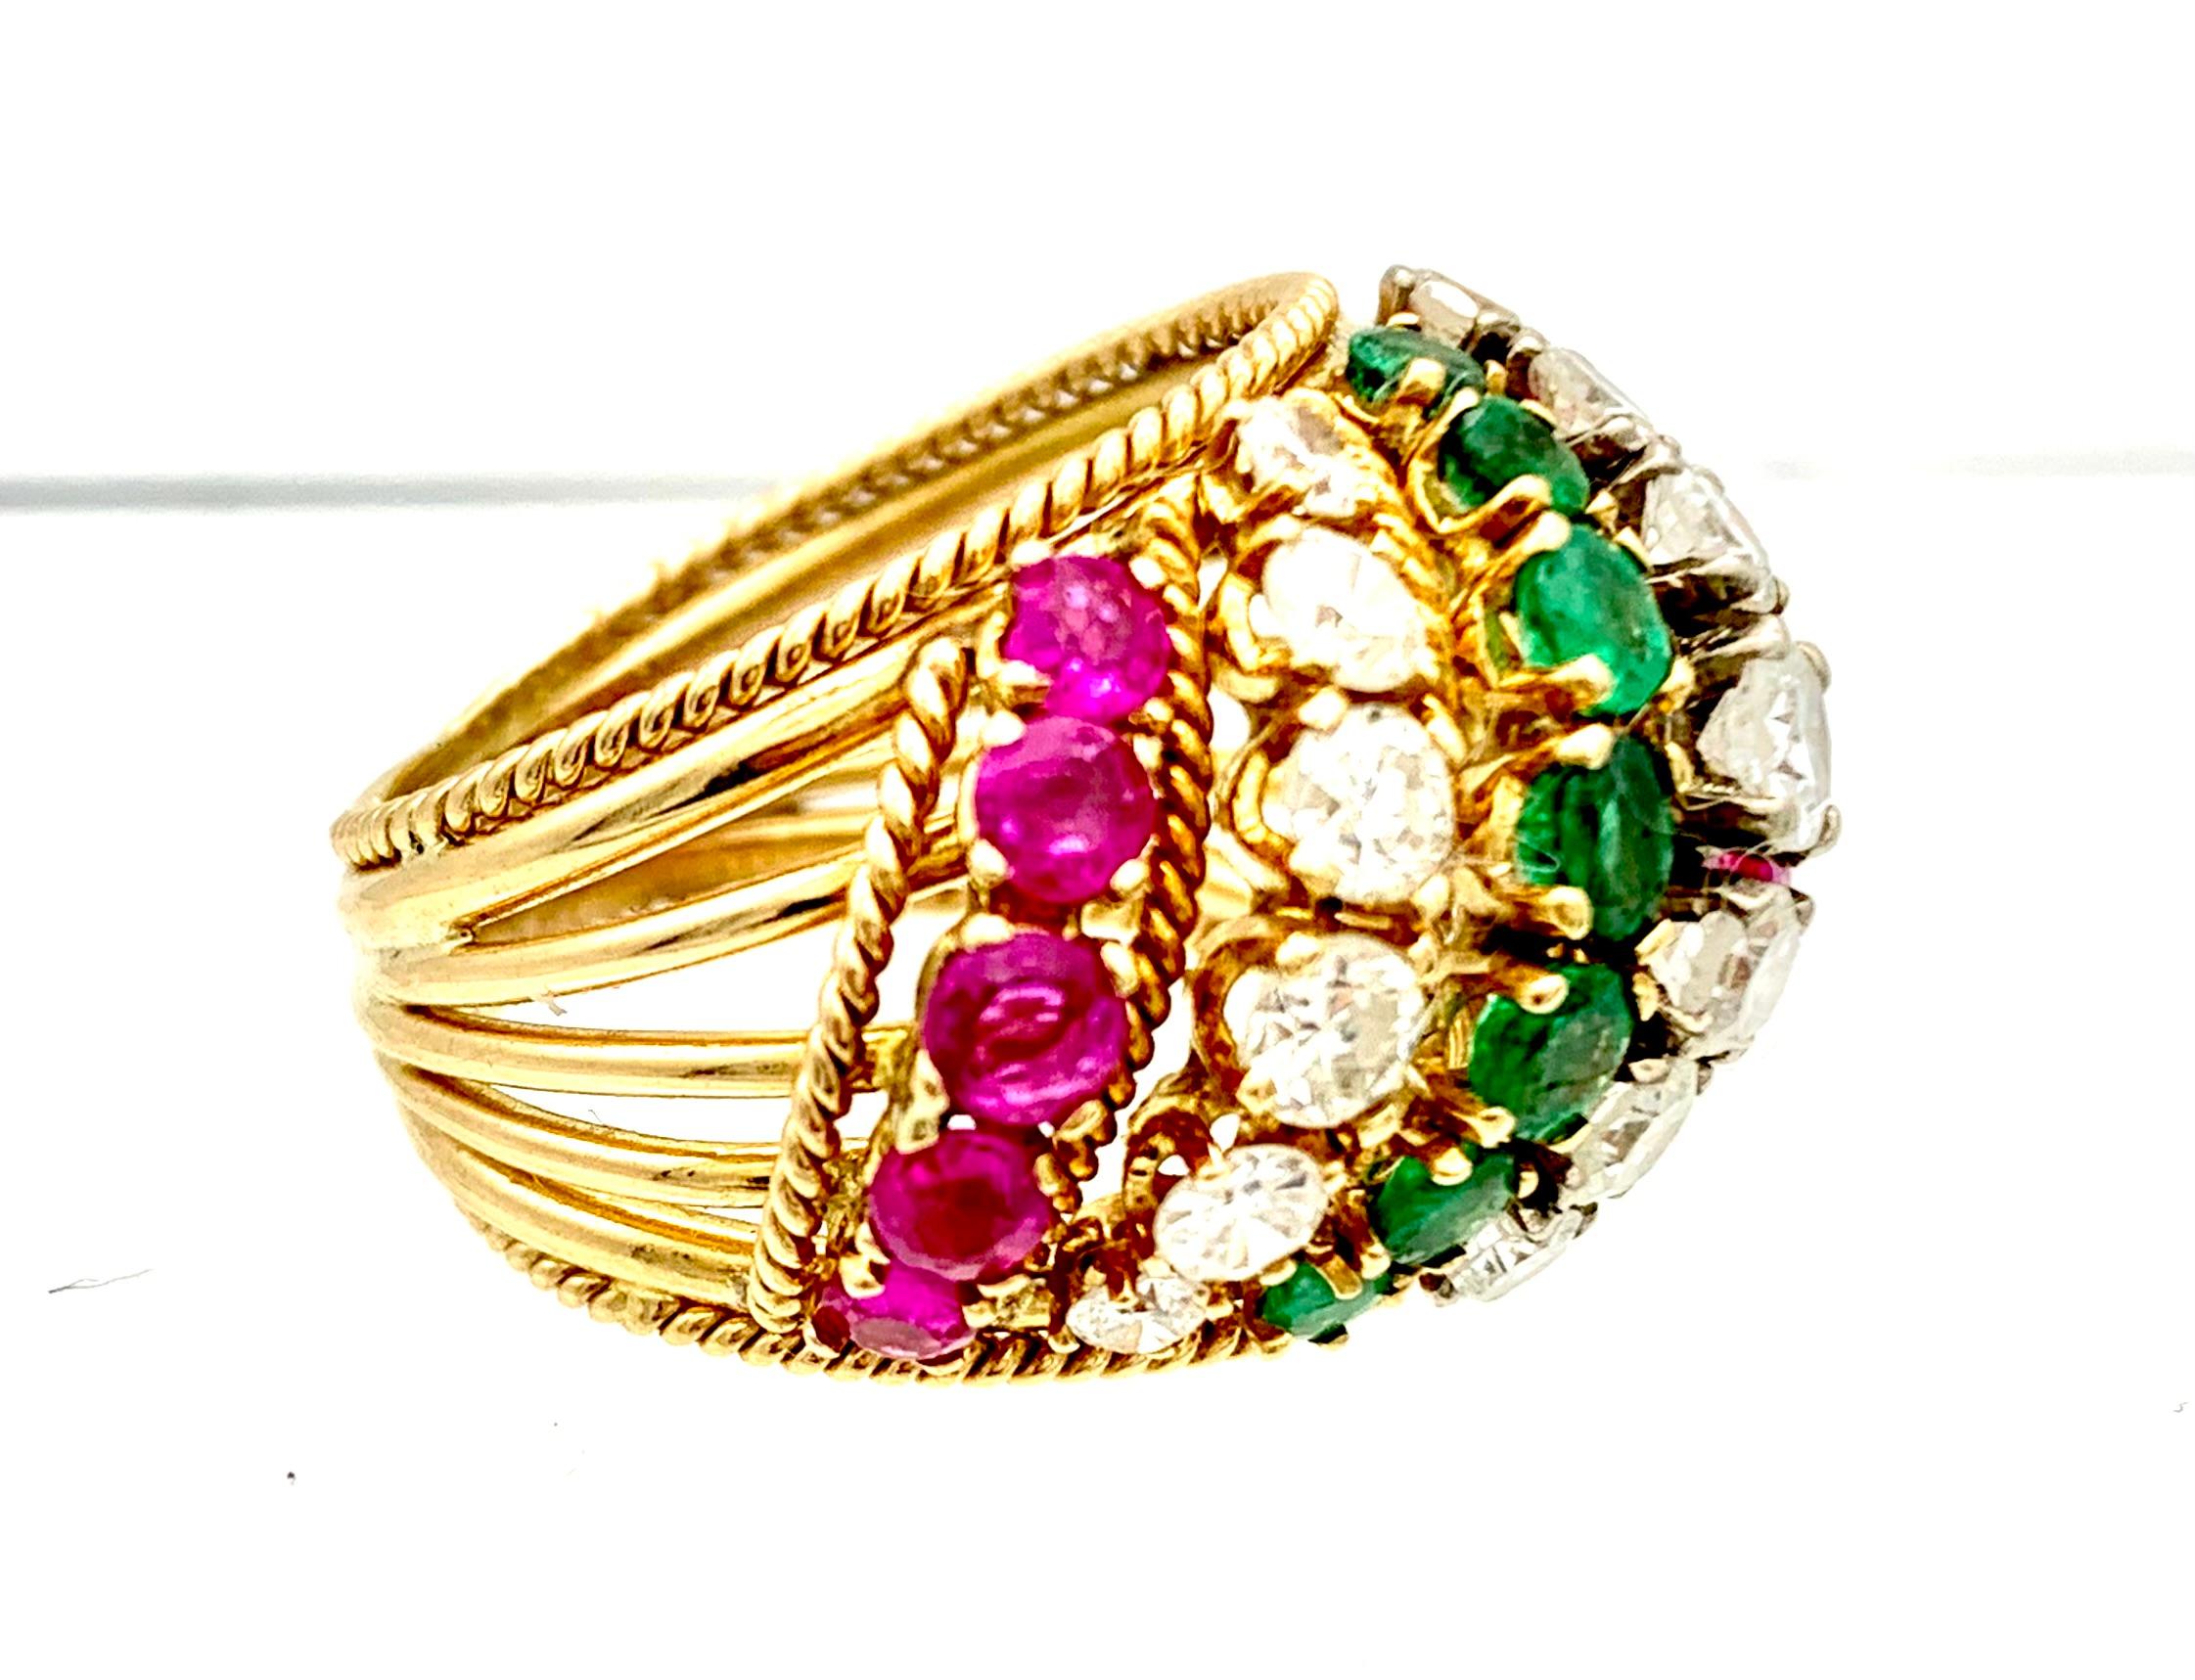 This elegant pinkie cocktail ring has been made out of 14 karat gold and is deorated with diagonal stripes set with emeralds, rries and diamonds.